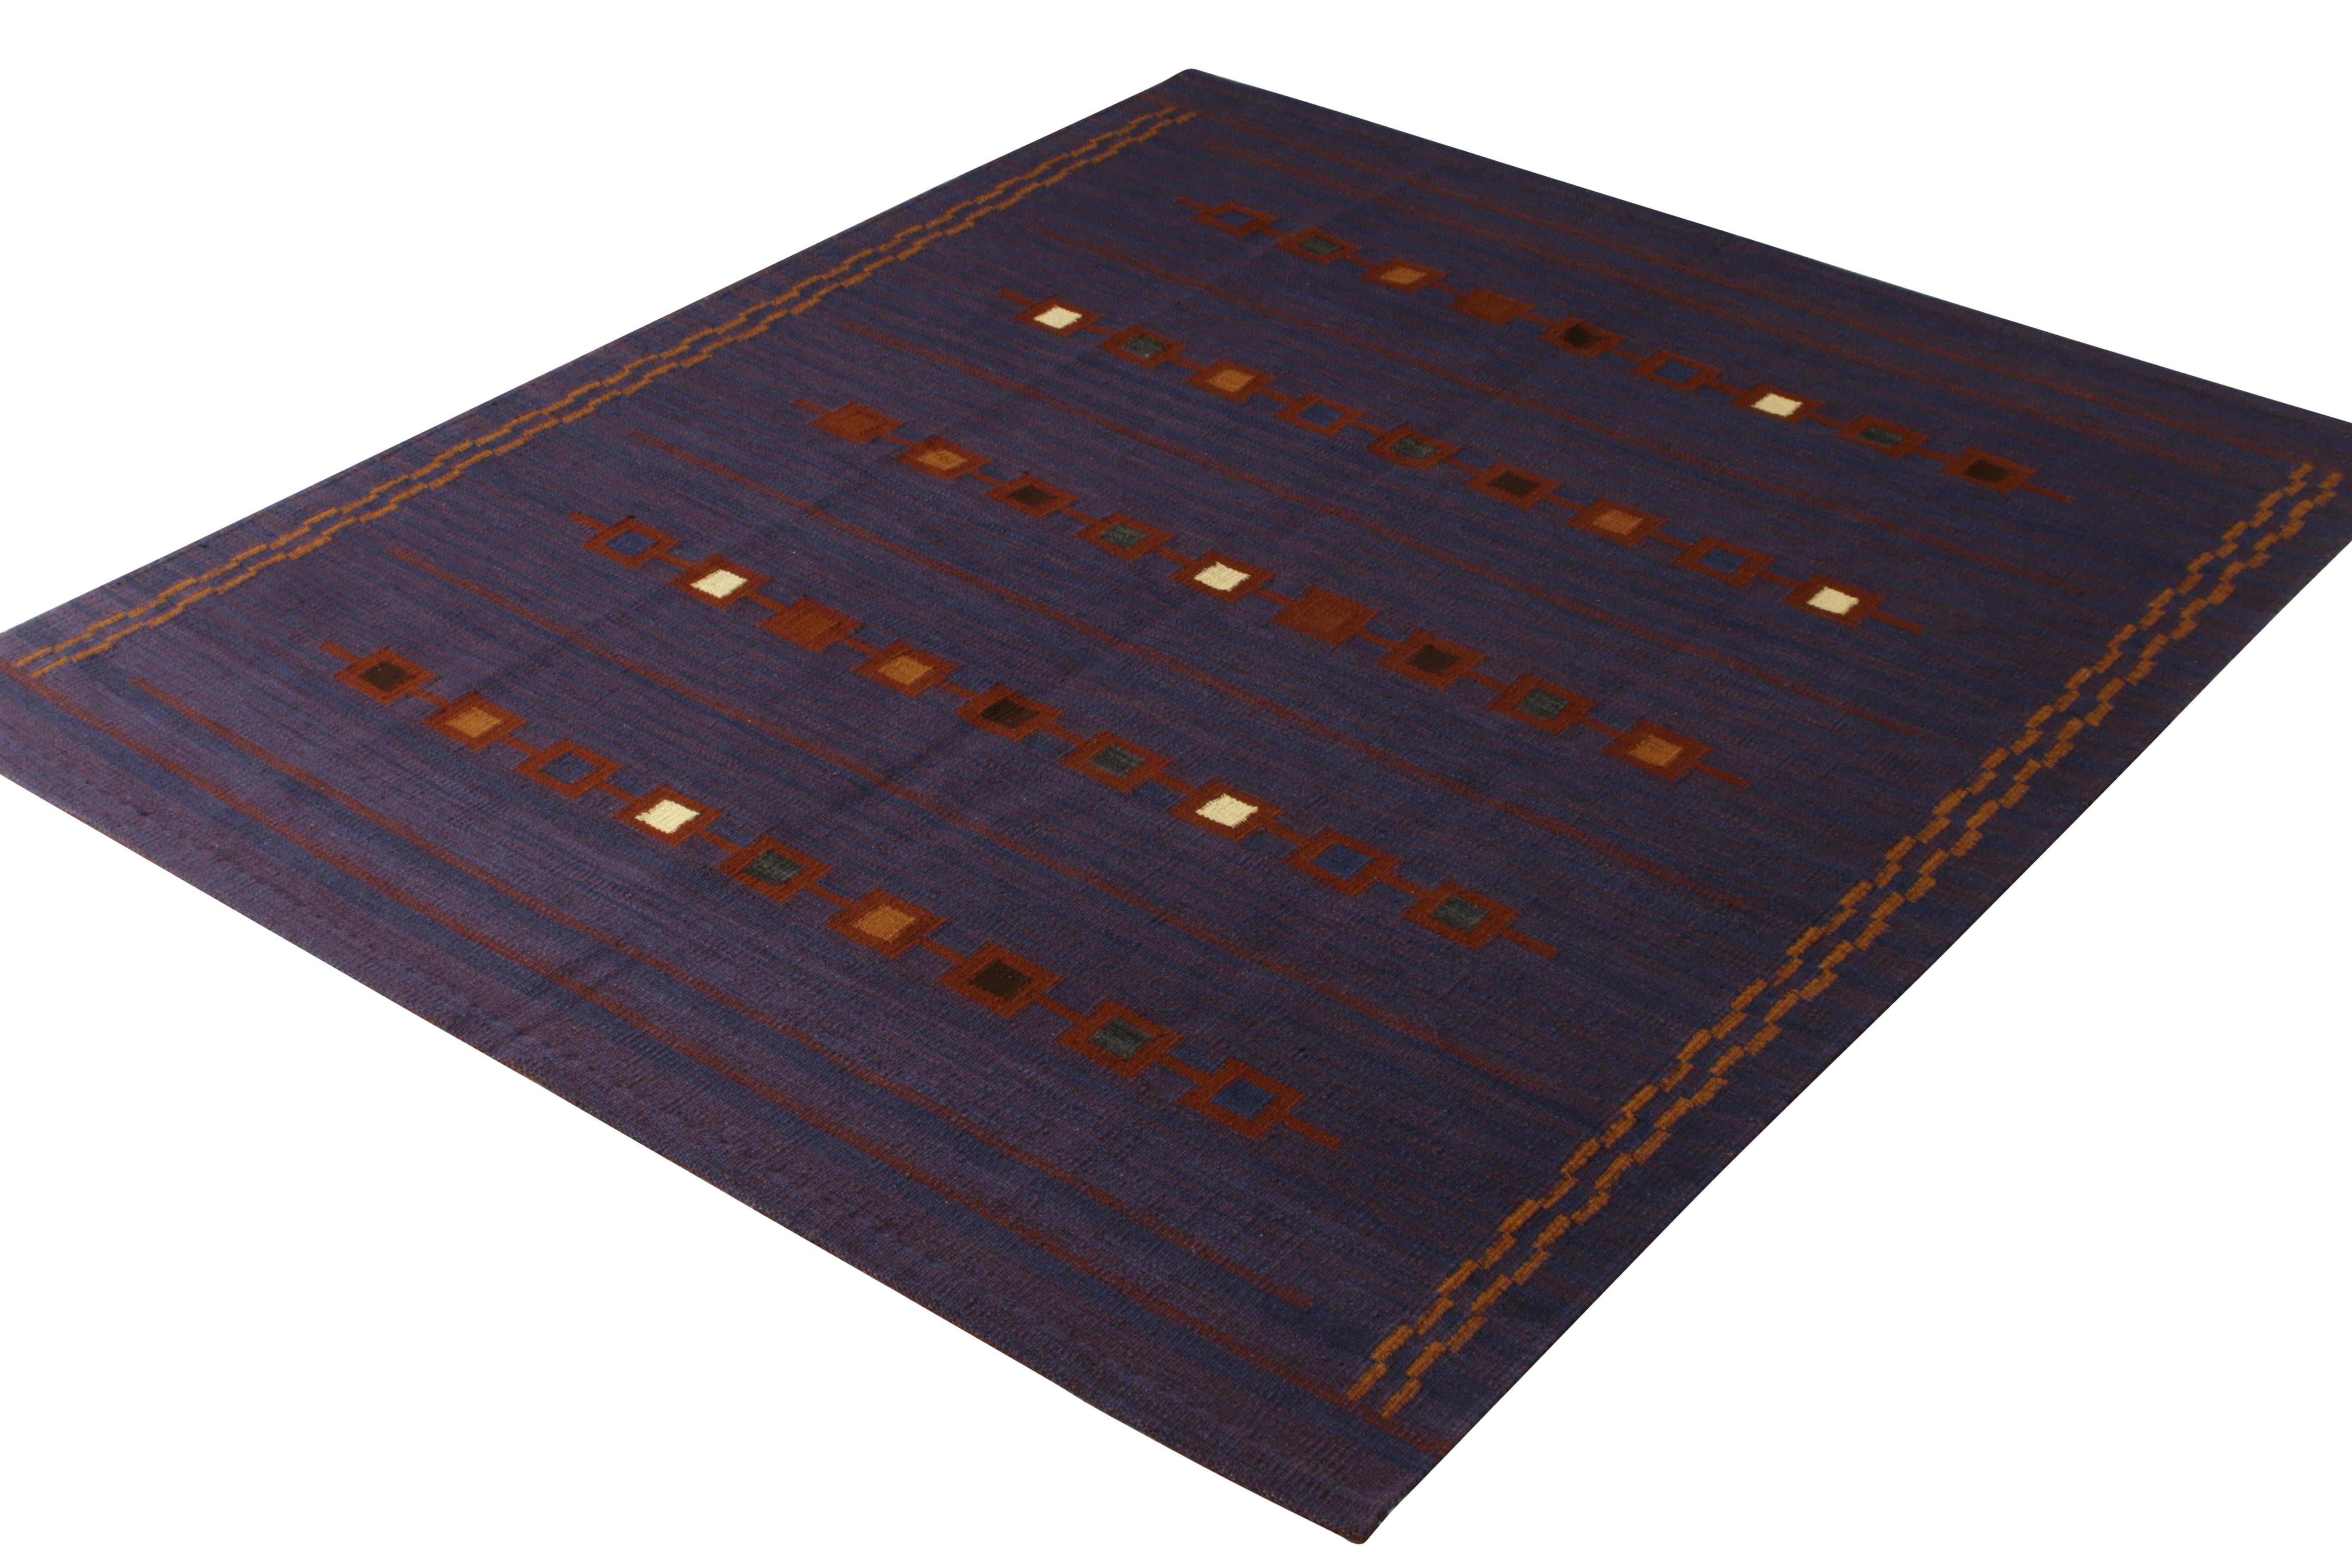 An 8 x 10 flat weave in purple and brown from the Scandinavian Collection by Rug & Kilim. Handwoven in wool, an ode to iconic mid-century Swedish modernism in our durable modern Kilim rug style. 

Further on the design: This particular